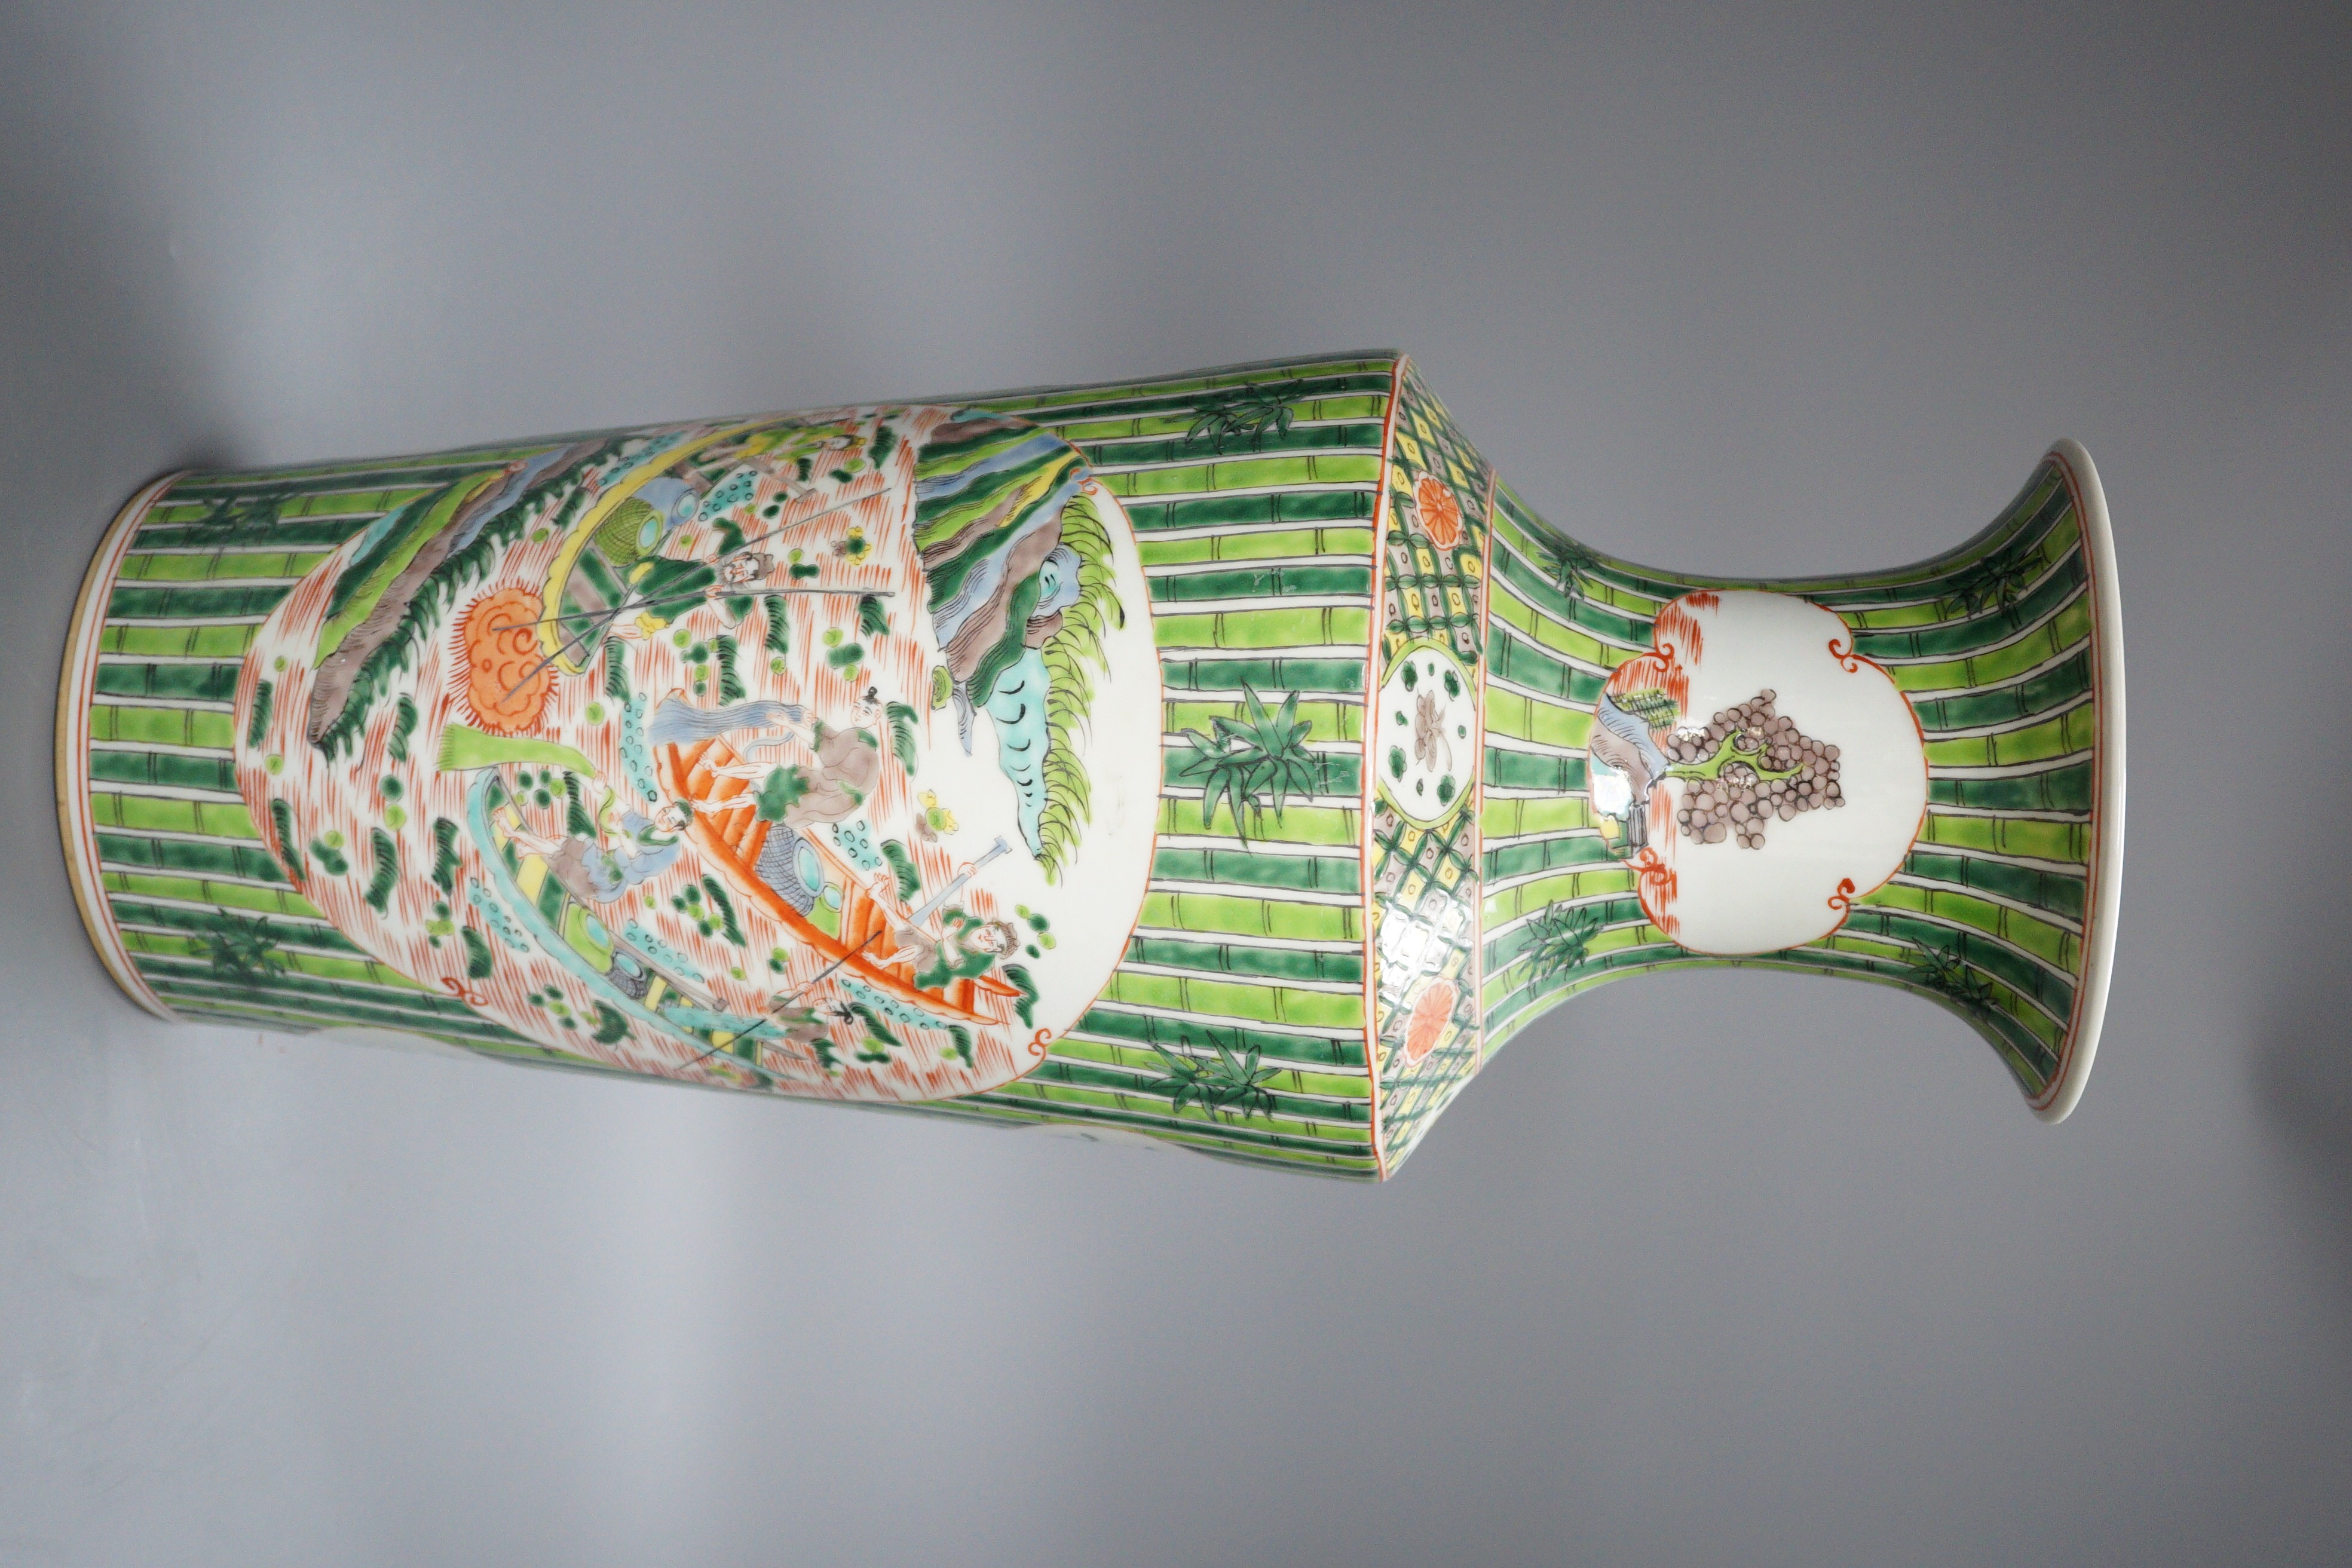 A 20th century Chinese figural vase, 44cm